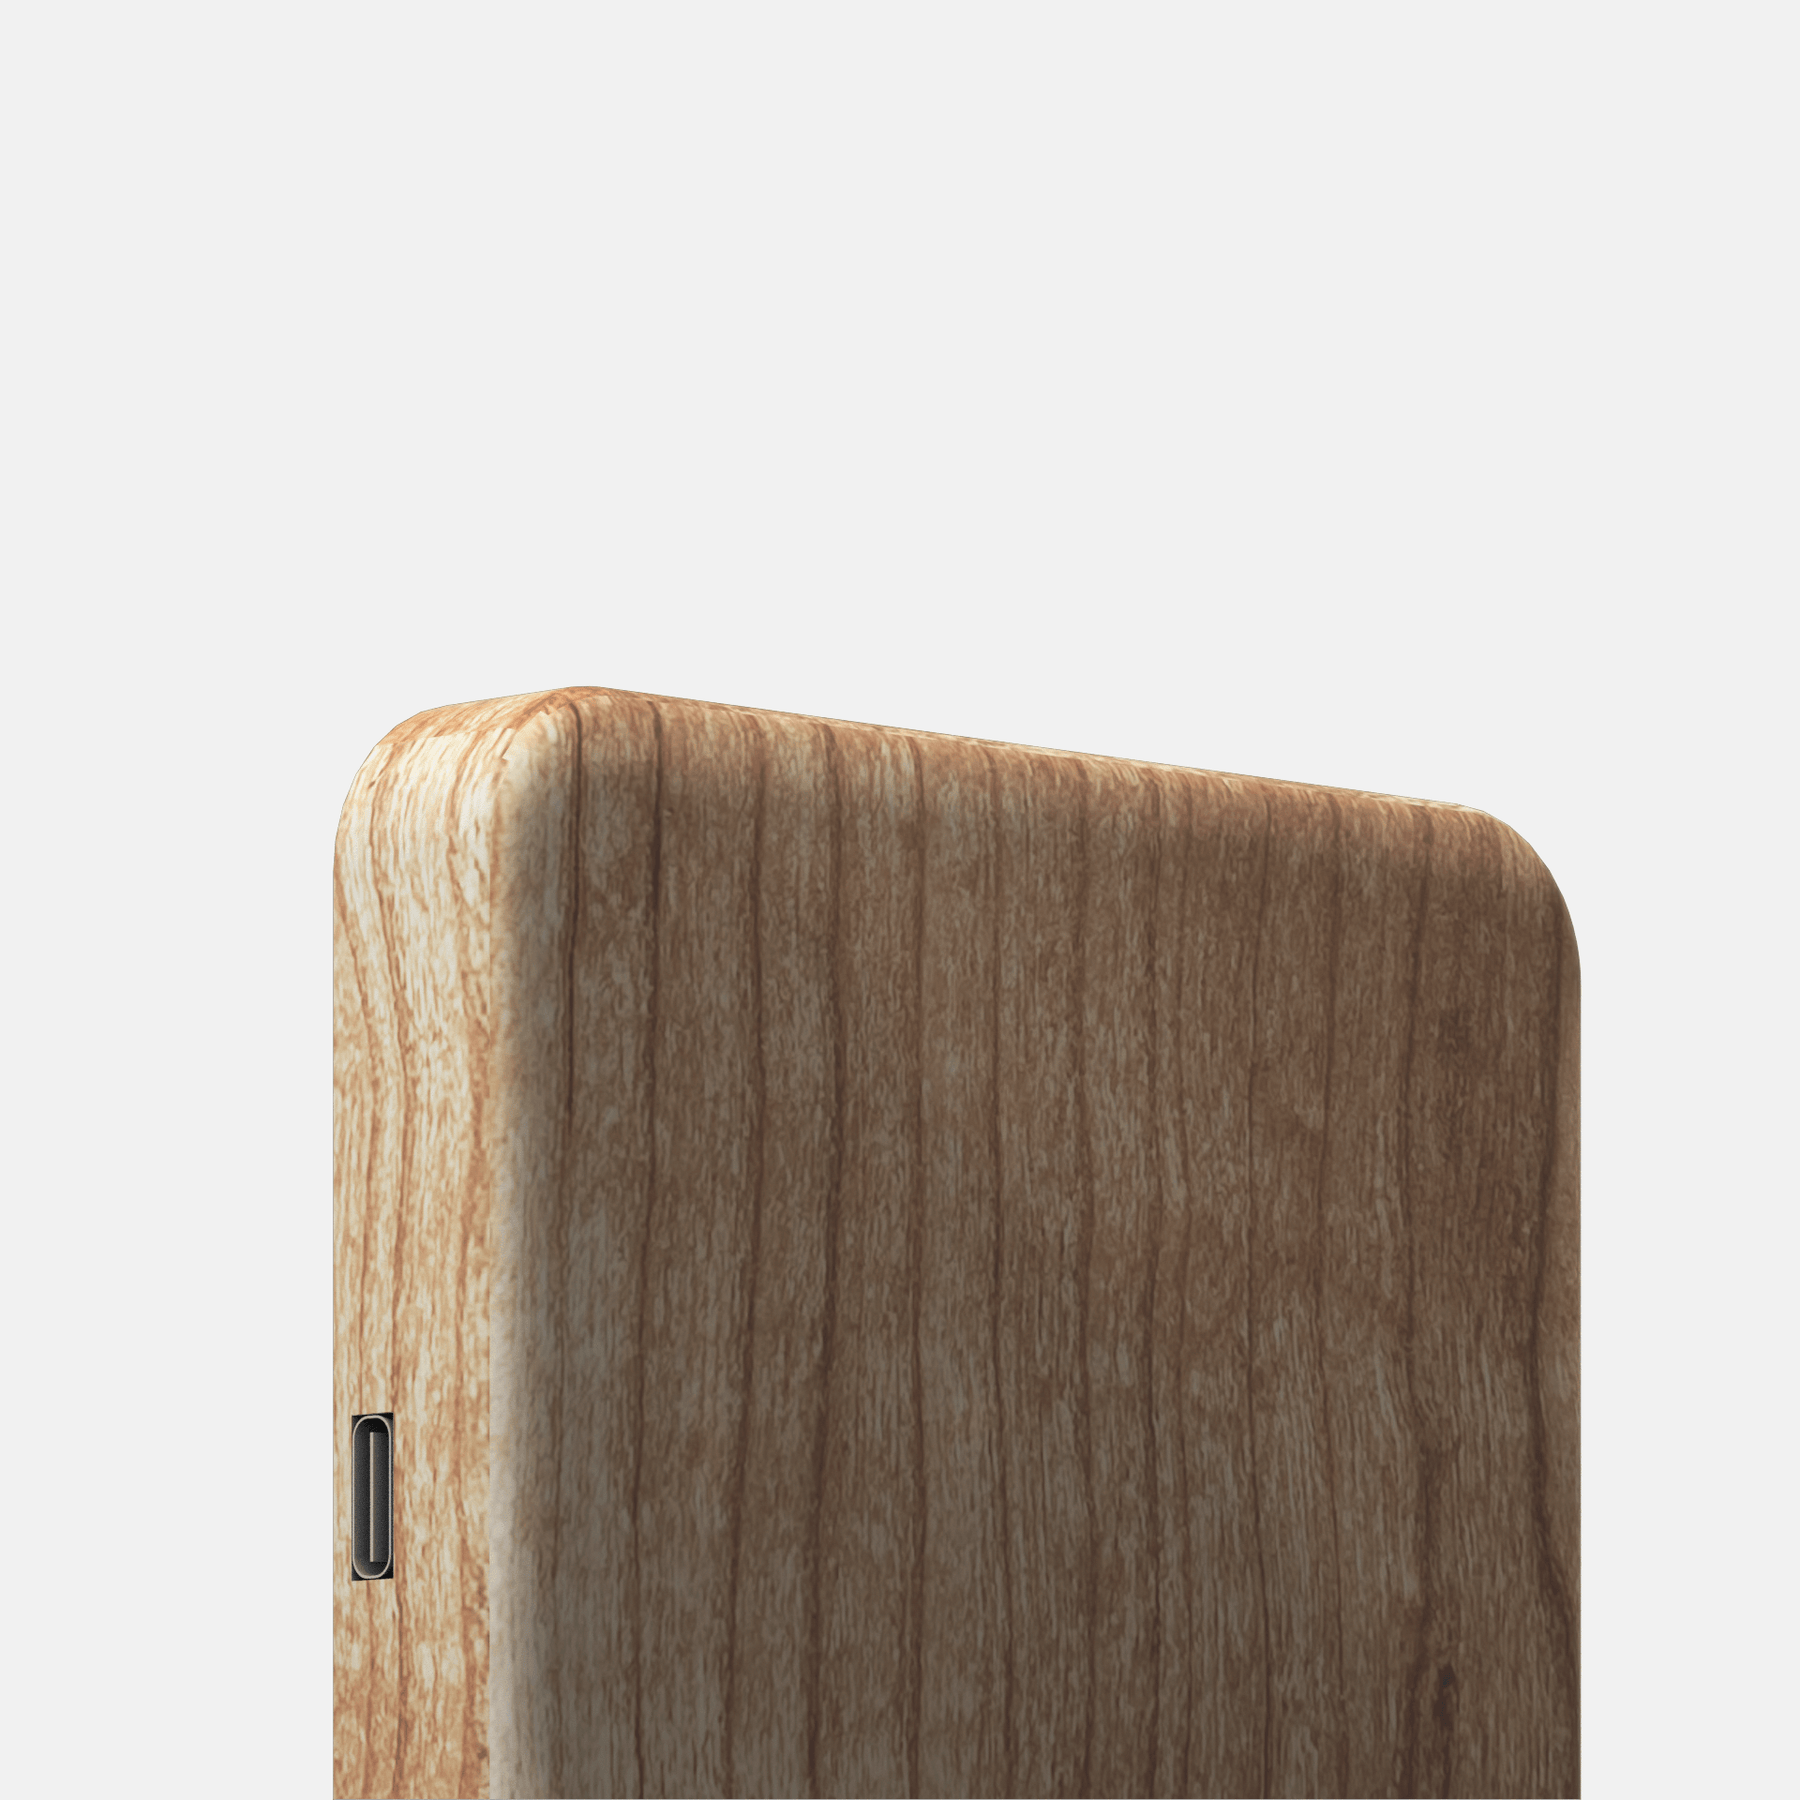 Wood Wireless Charger for iPhone/Pixel/Samsung. Fast Charging.